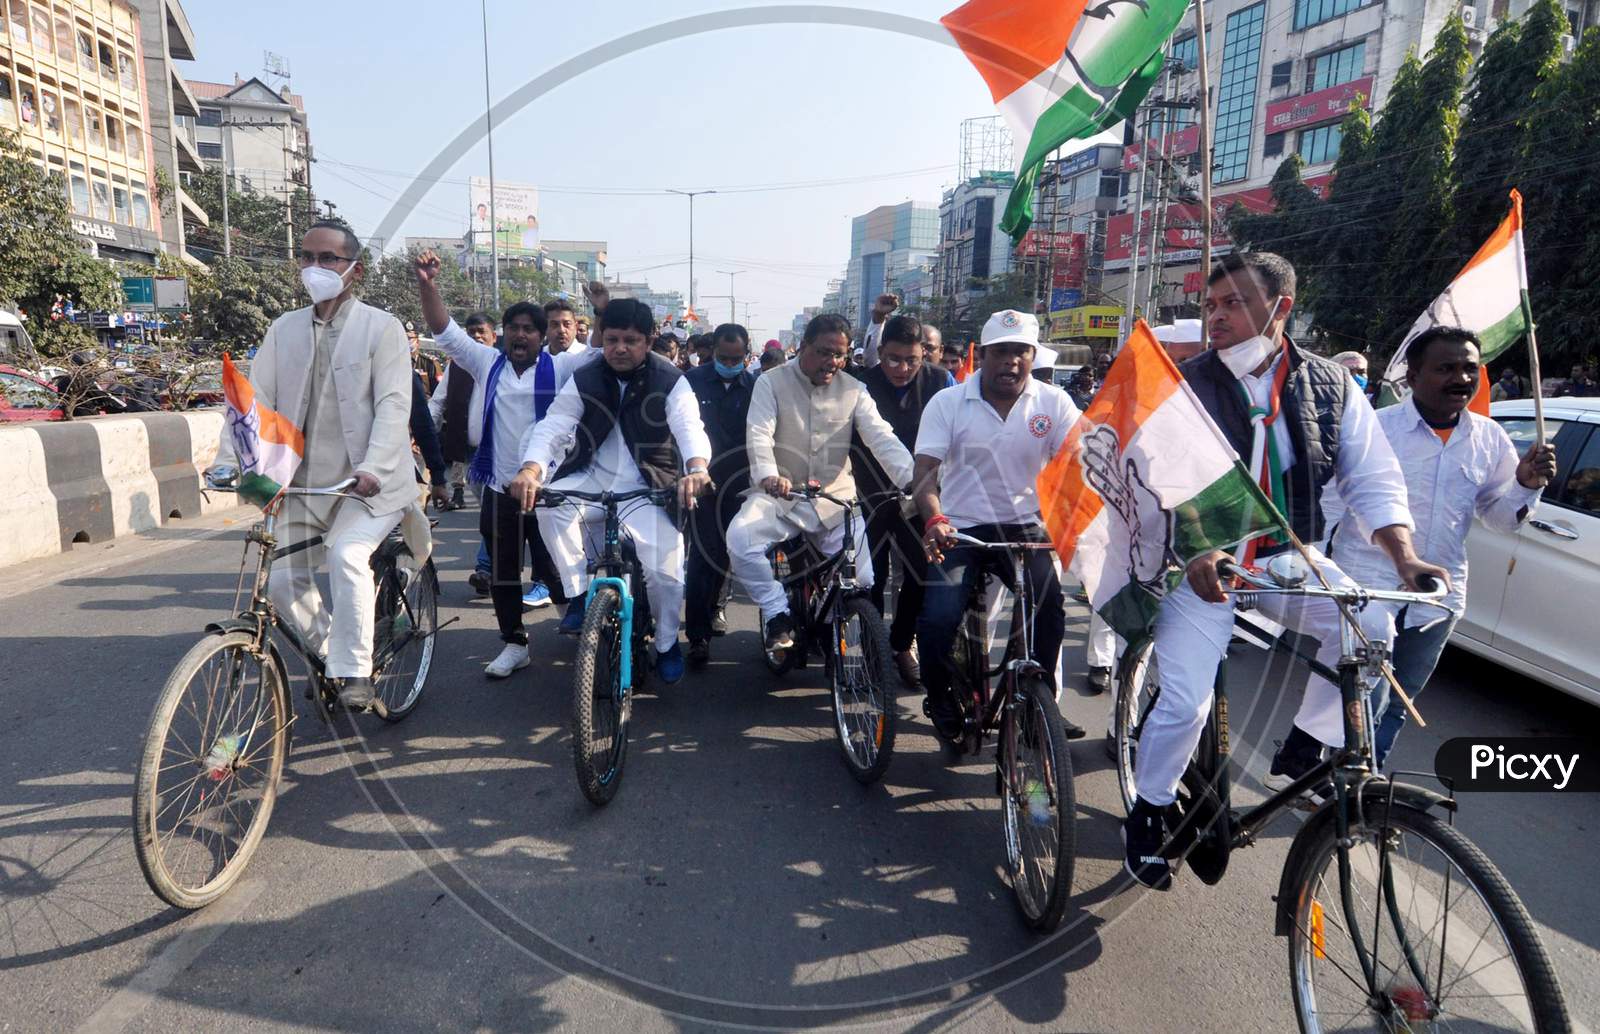 MP Gaurav Gogoi, Assam Pradesh Congress Chief Ripun Bora, and senior party leaders take part in a protest rally against fuel price hike, in Guwahati, Monday, Dec. 28, 2020.